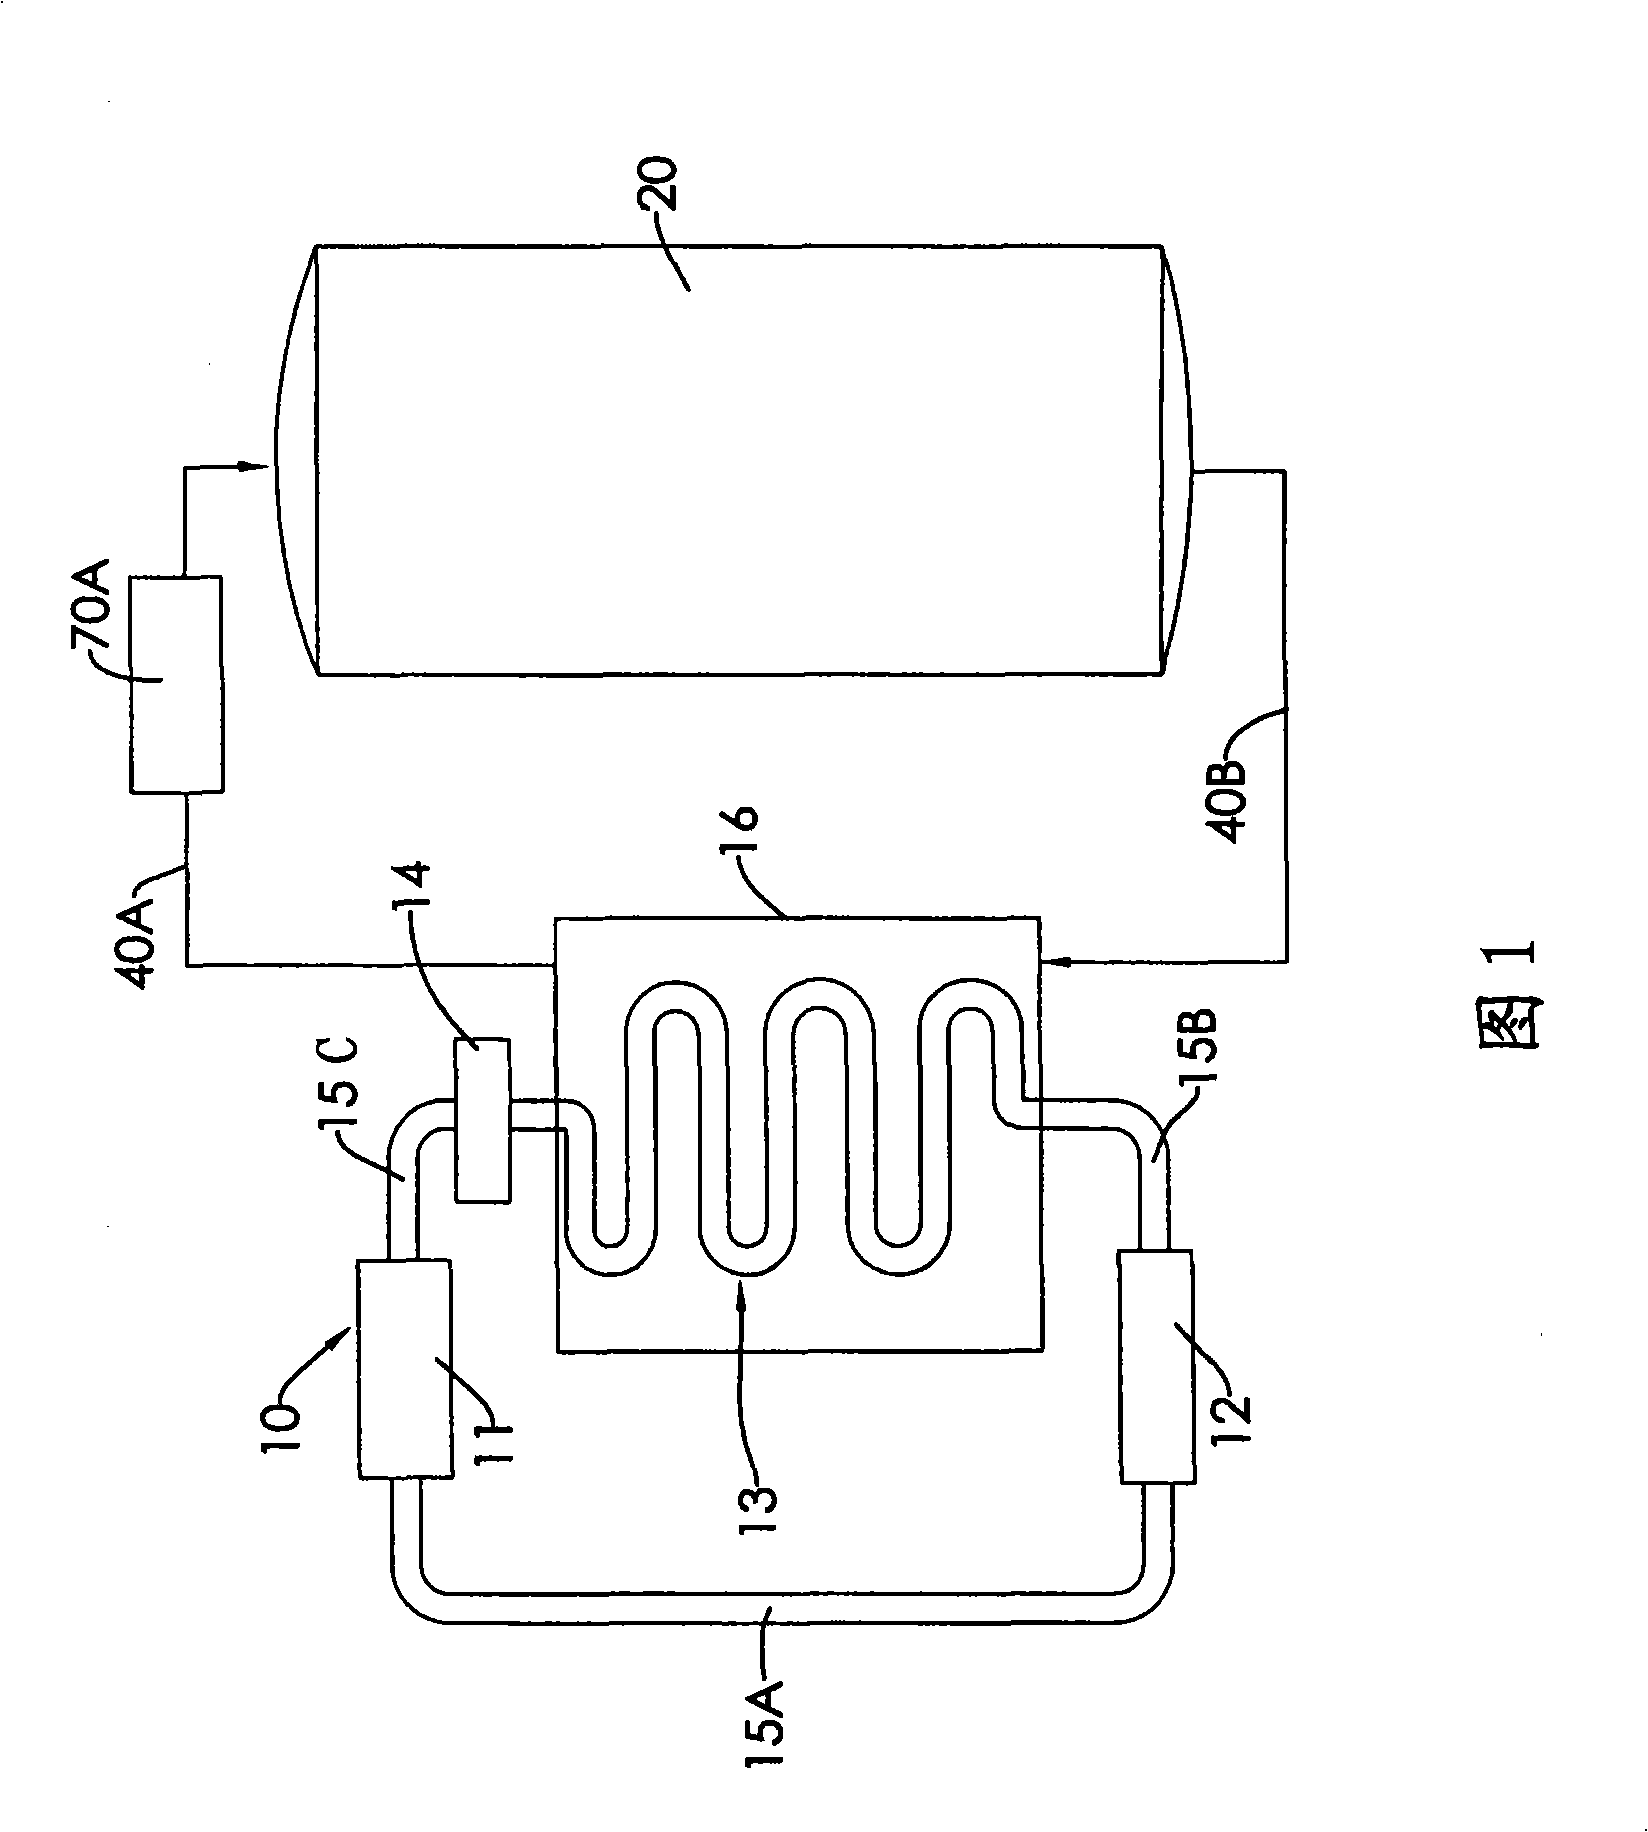 Heat exchange system for producing substrate